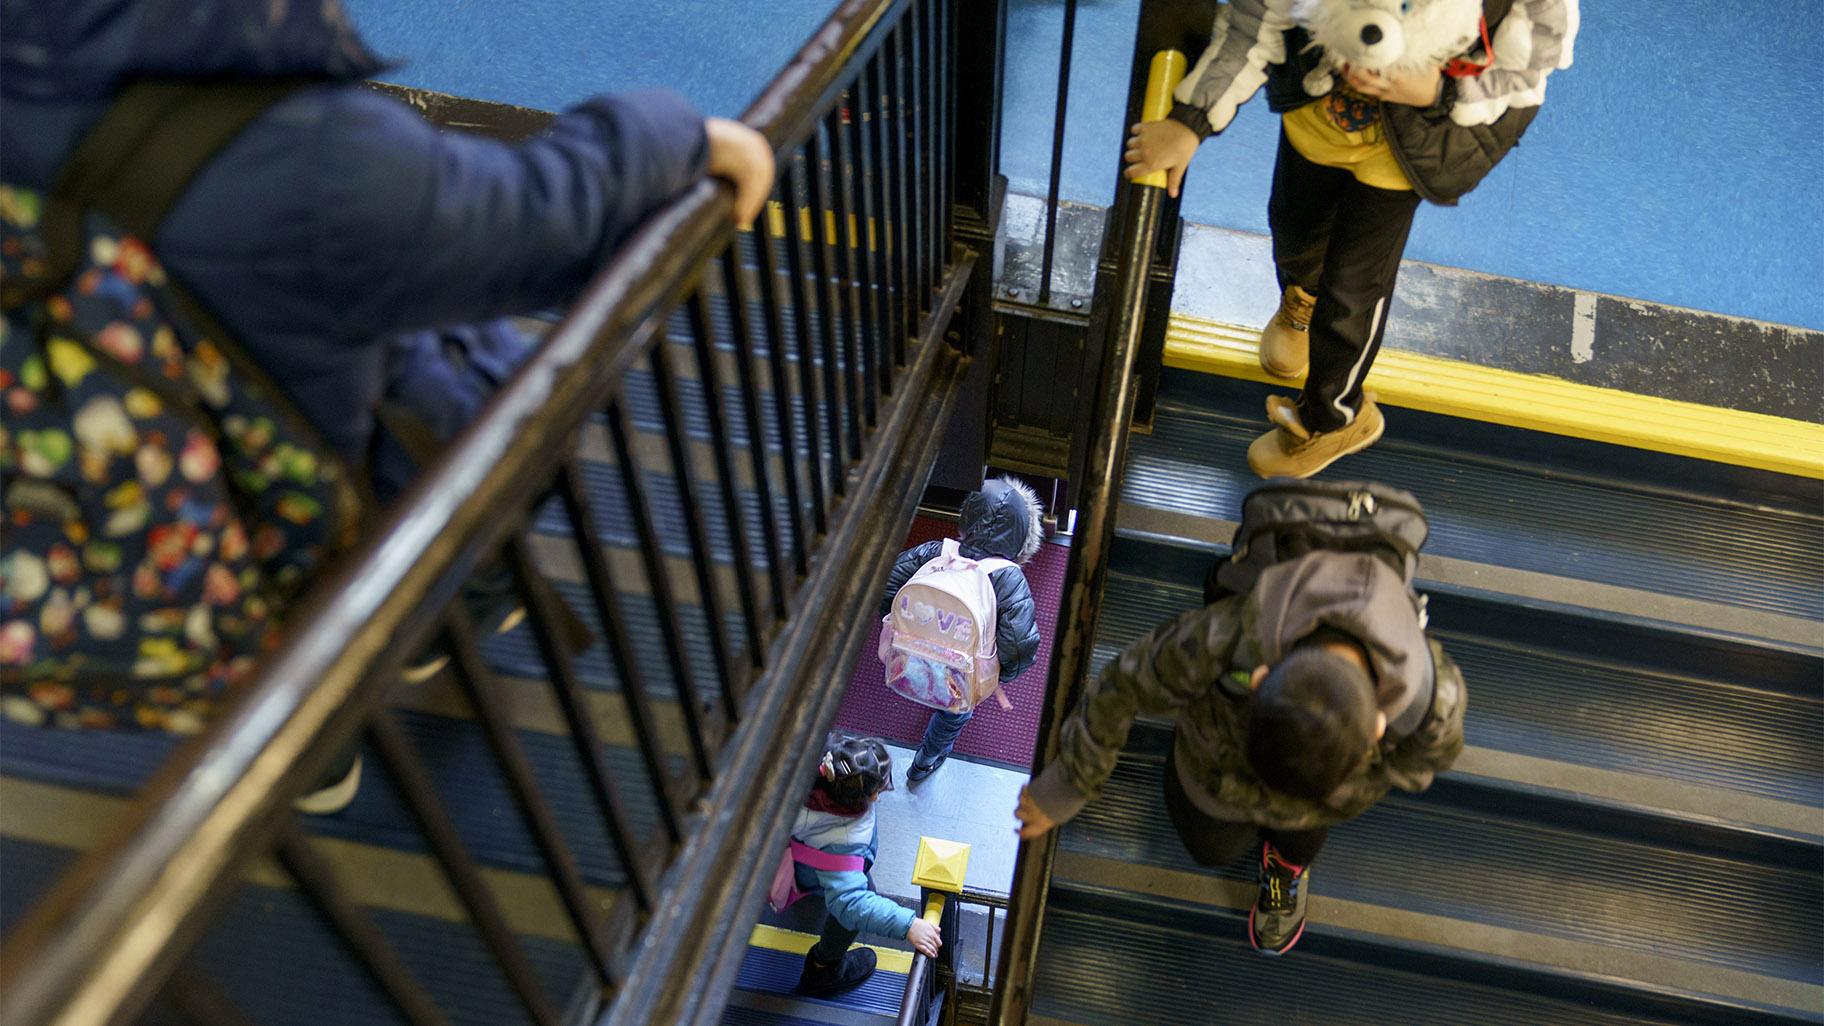 Students exit through a stairwell during dismissal at Raices Dual Language Academy, a public school in Central Falls, R.I., Feb. 9, 2022. (AP Photo / David Goldman, File)